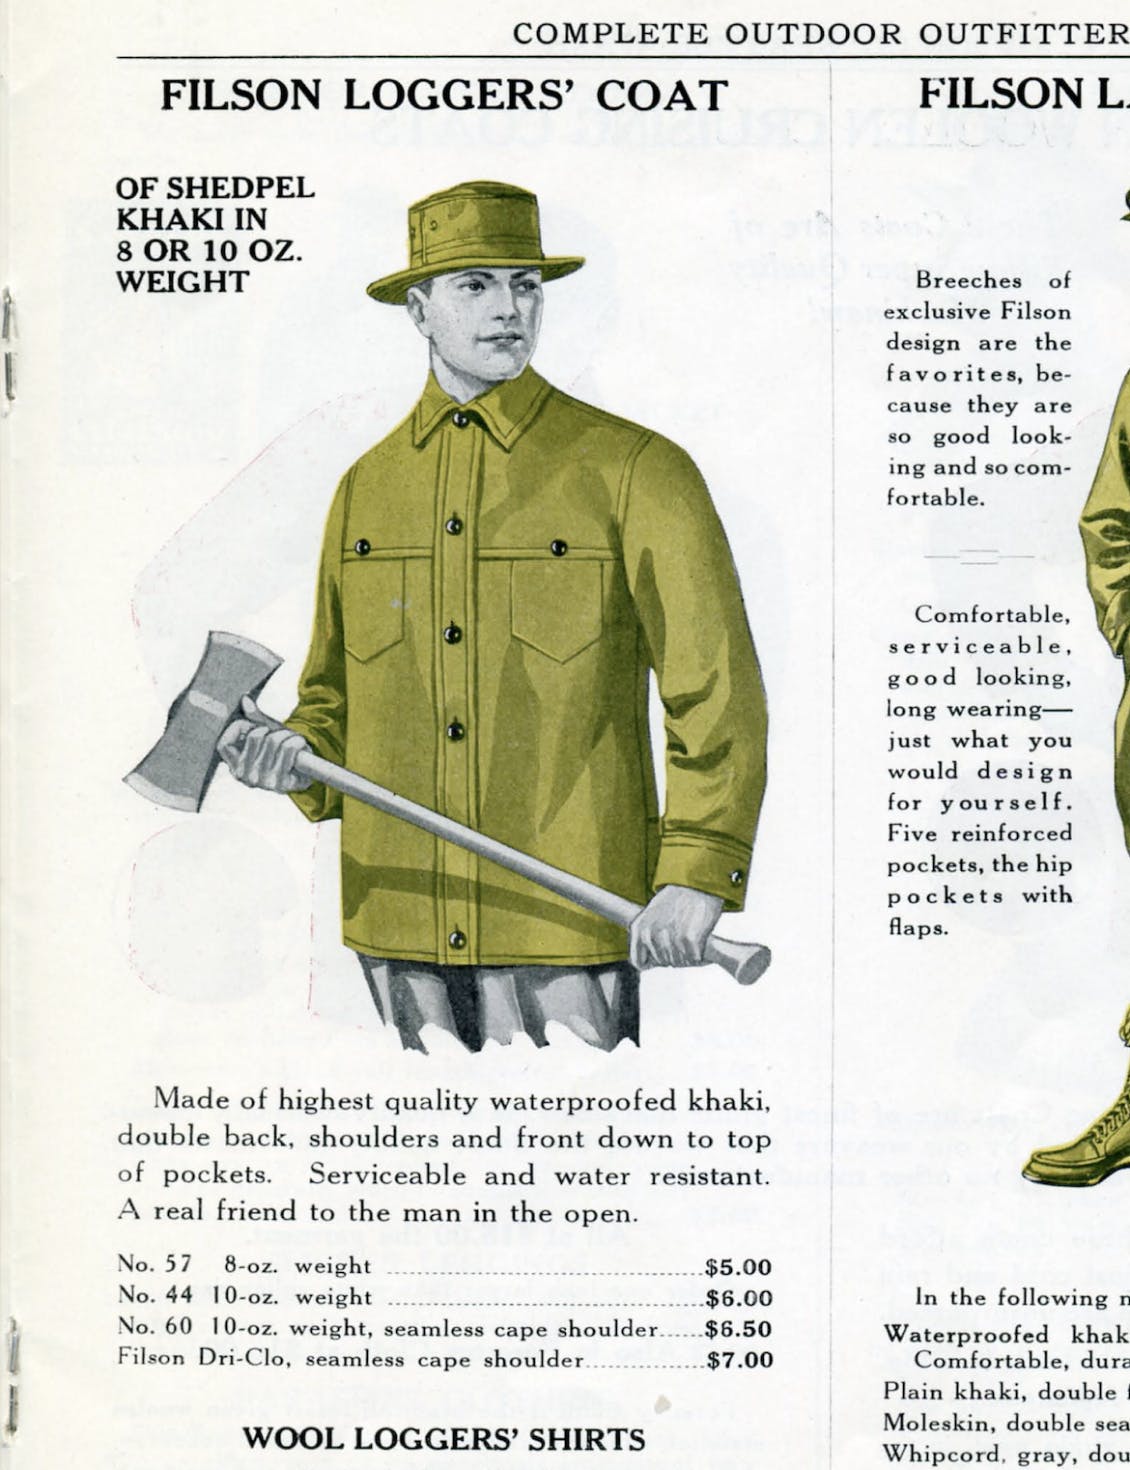 British Millerain & the History of Waxed Canvas | The Filson Journal